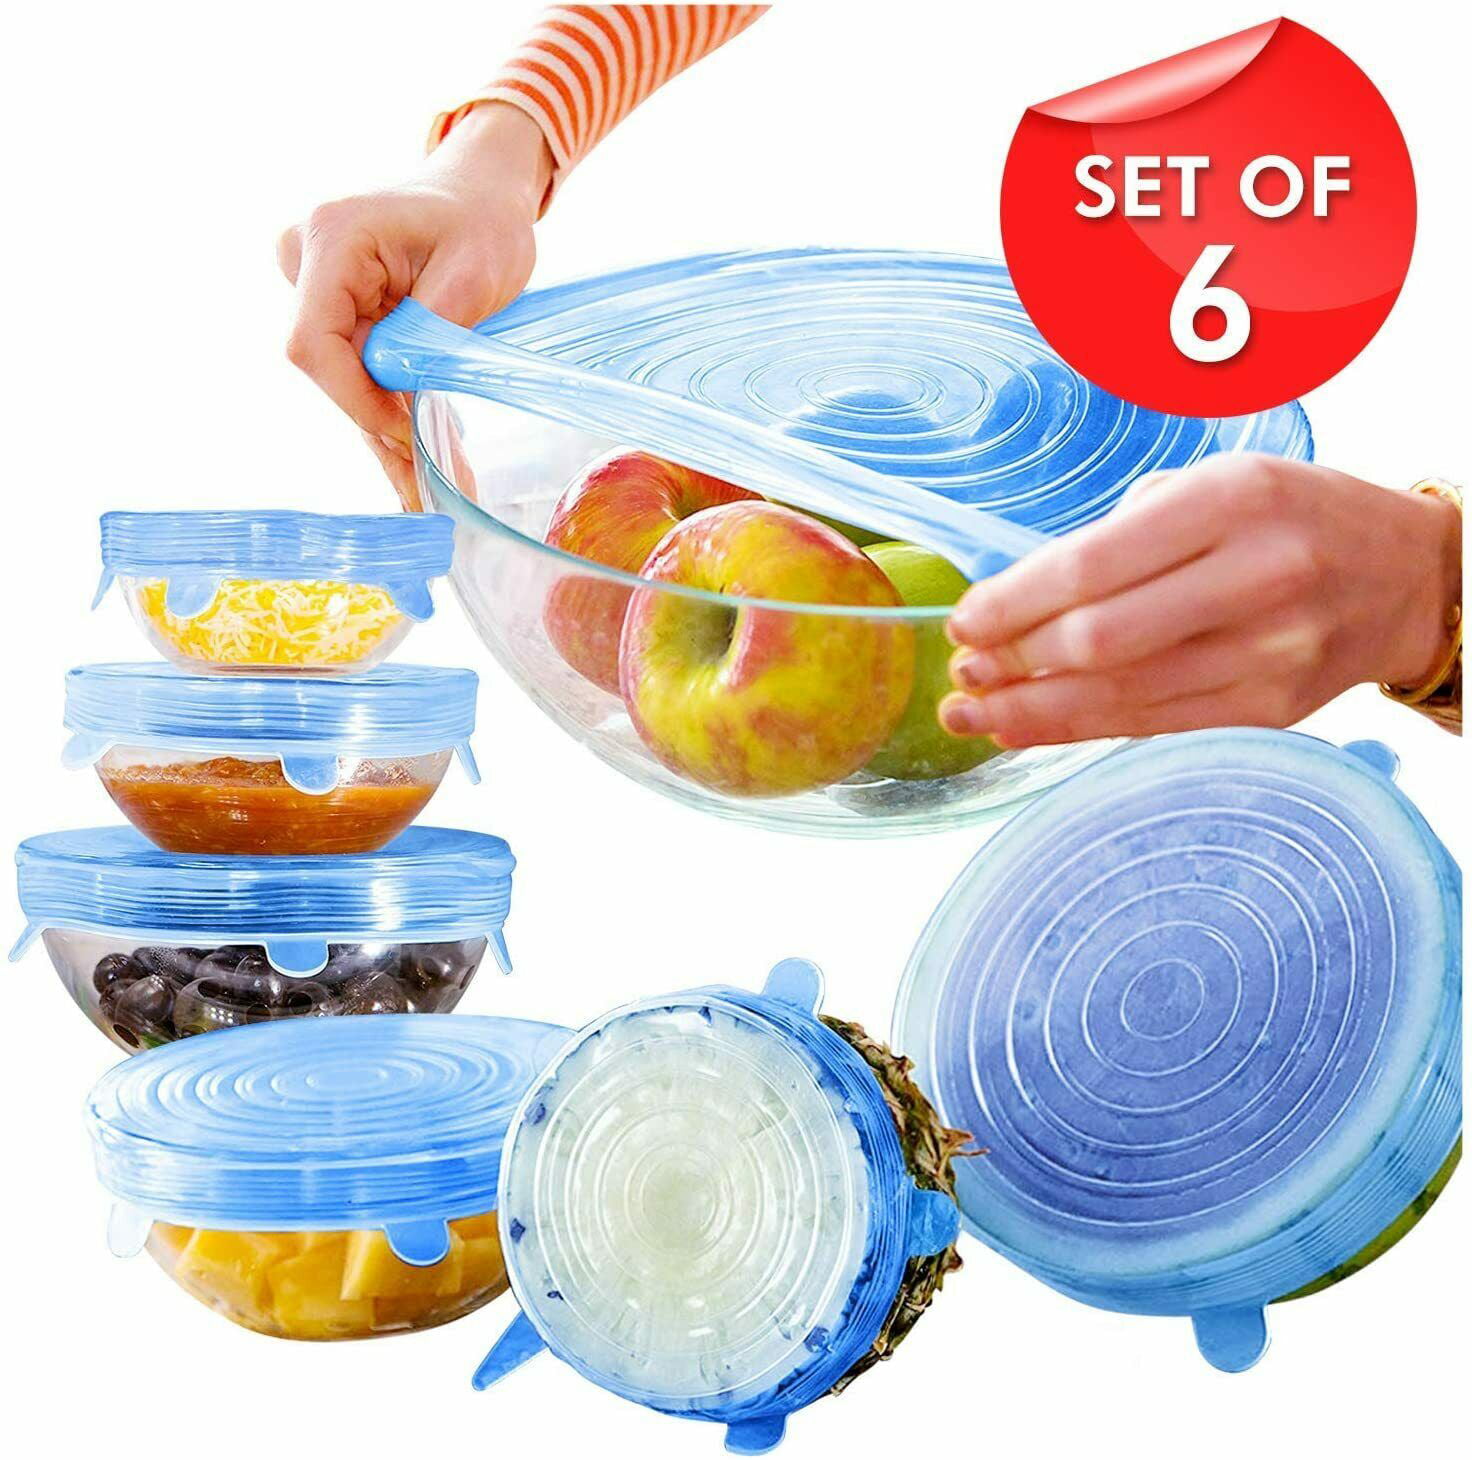 Fit All Shape 6pcs Reusable & Adjustable Silicone Food Cover Stretch Bowl Wrap 